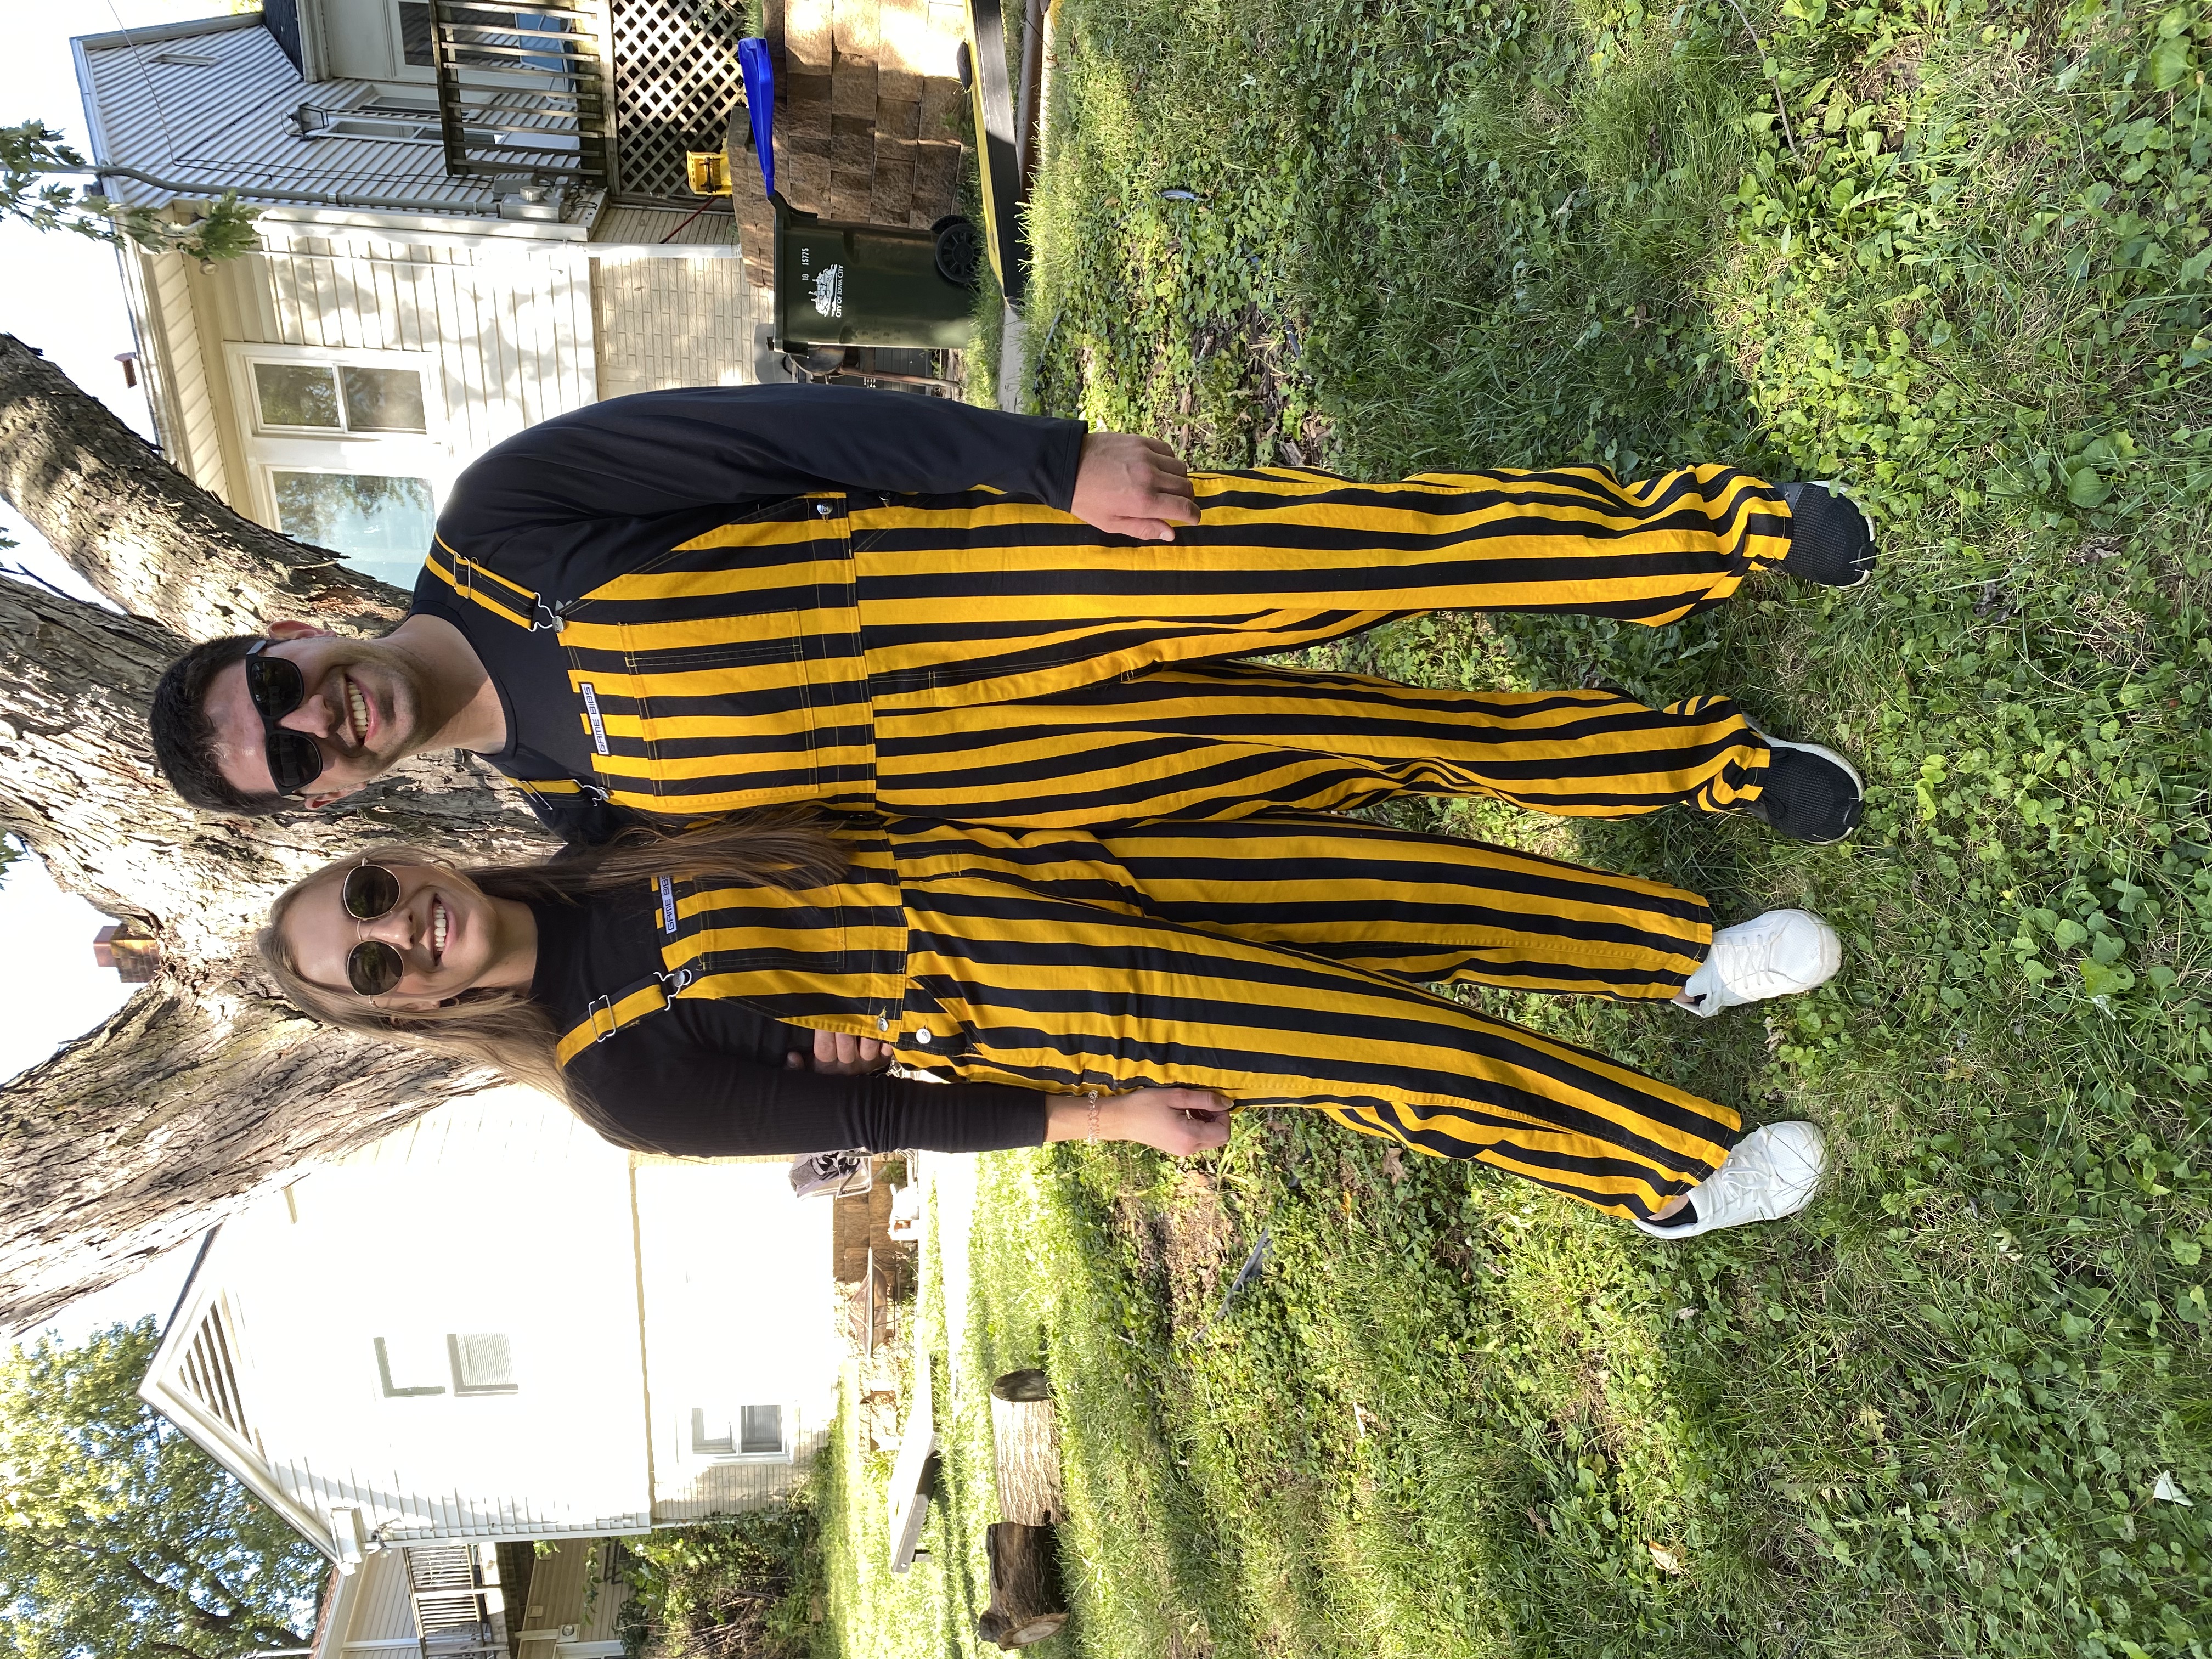 Jack Klein stands outdoors with his fiancee. Both are wearing gold and black striped game bibs.